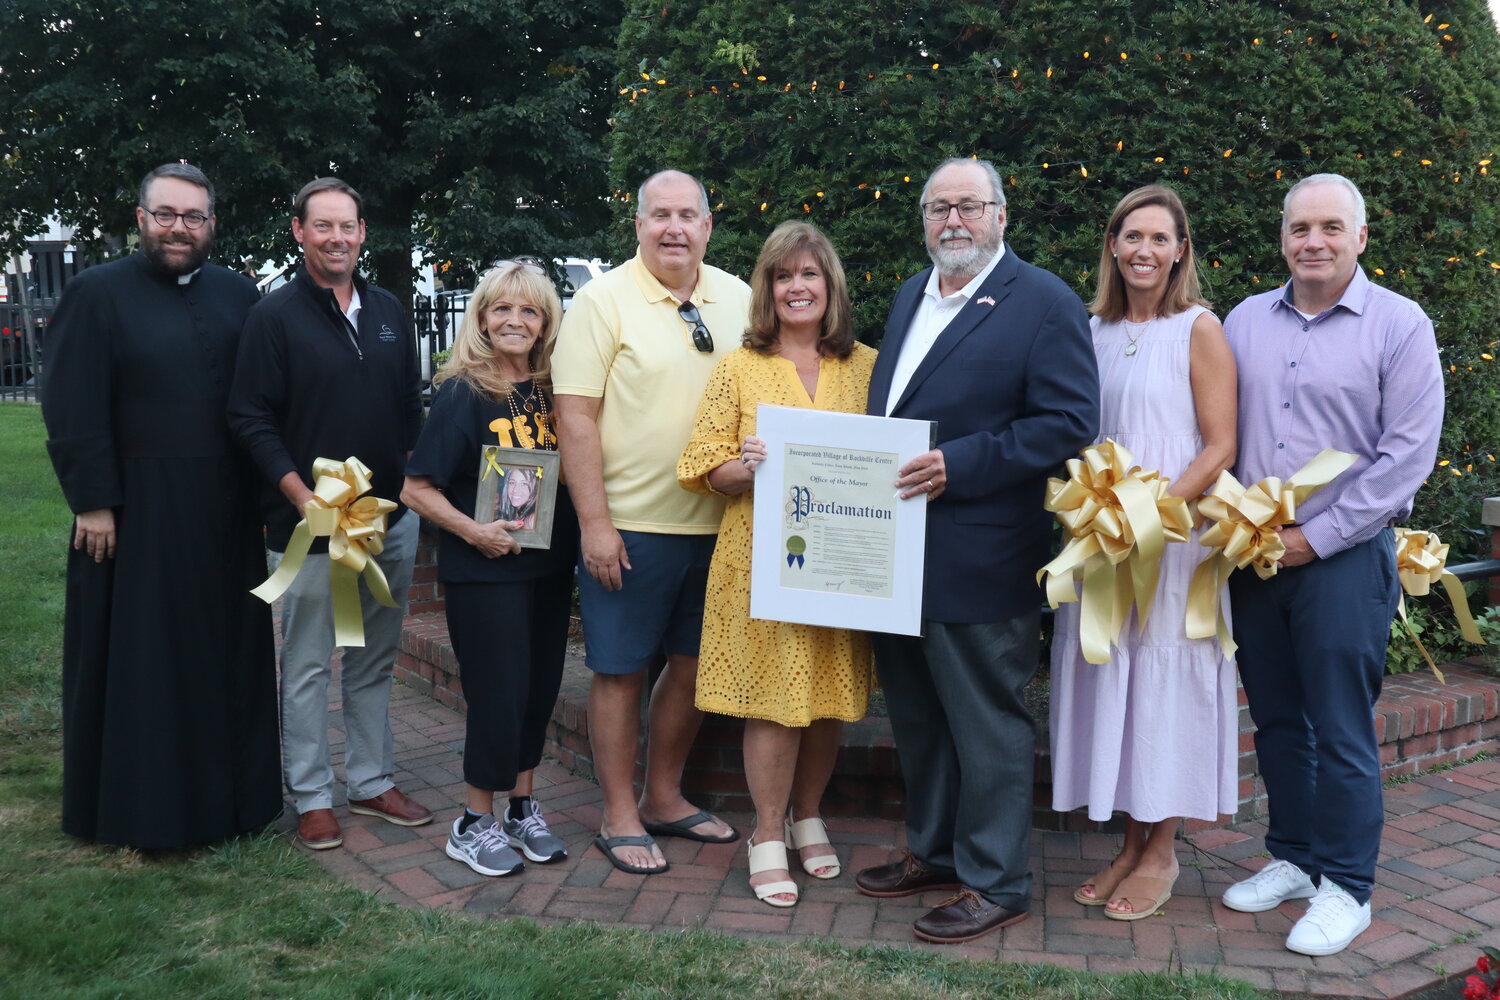 Father Michael Duffy of St. Agnes Cathedral, left, joins Village Trustee Gregory Shaughnessy, Marie Giallombardo, whose daughter Gina died of the same rare form of cancer, Fran and Carol Ruchalski, Rockville Centre Mayor Francis Murray, Village Trustees Katie Conlon and Emilio Grillo in presenting a proclamation in recognition of all the hard work the Mary Ruchalski Foundation has done towards finding a cure.